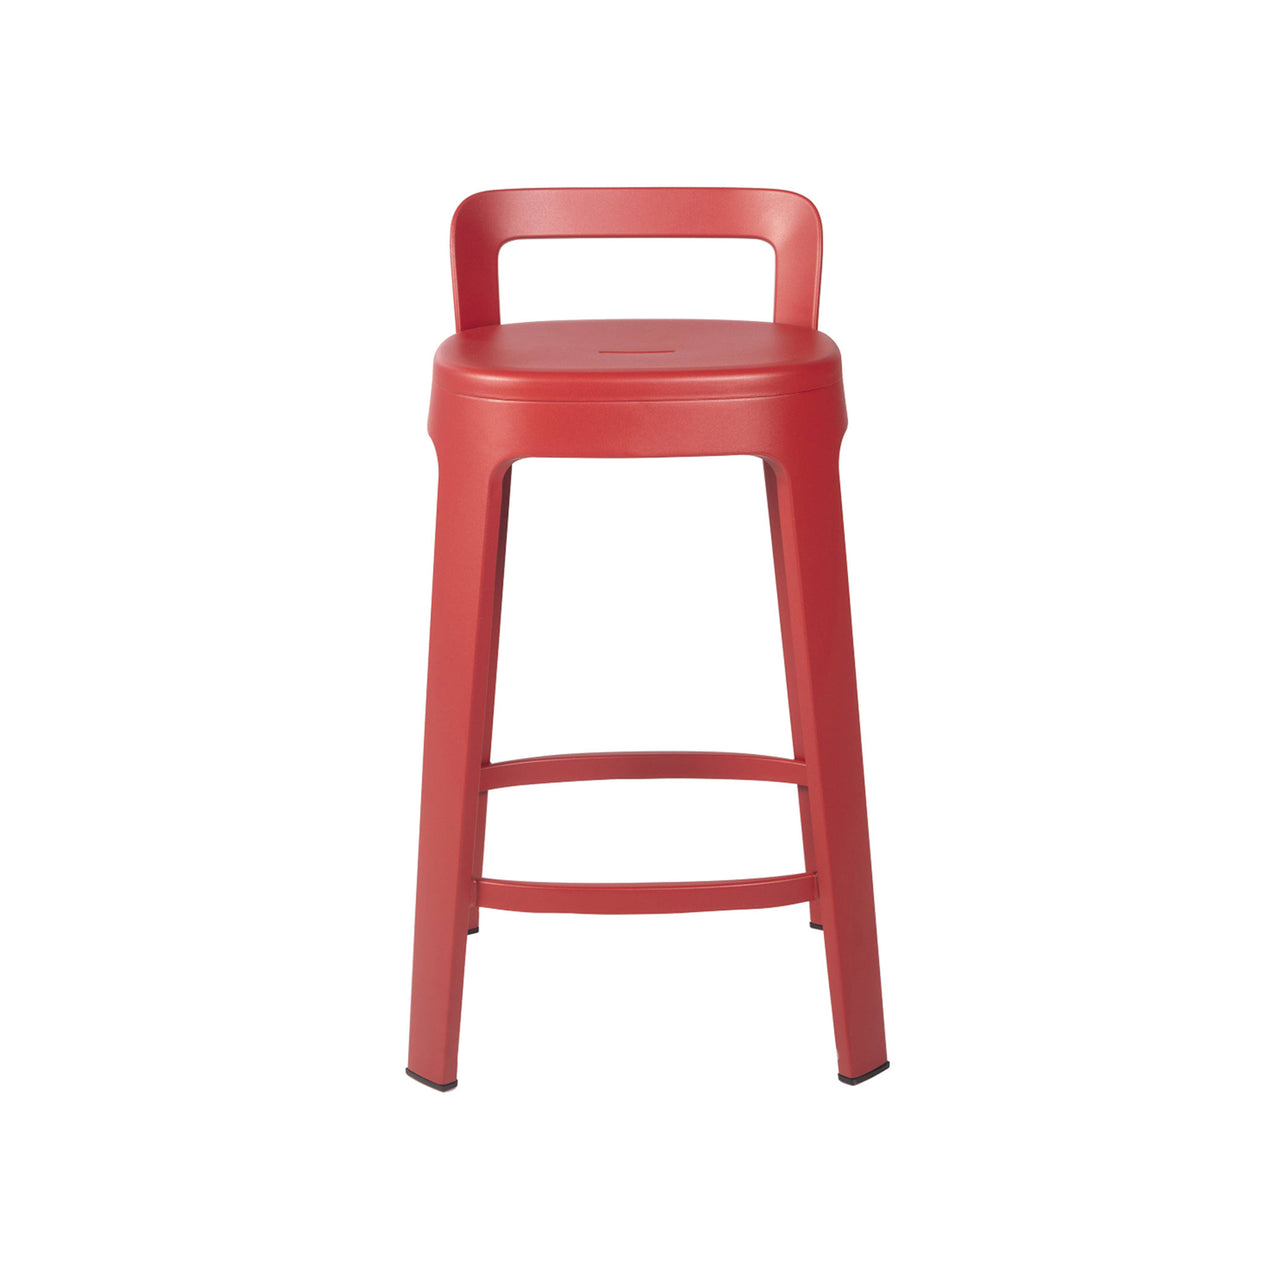 Ombra Bar + Counter Stool with Backrest: Counter + Red